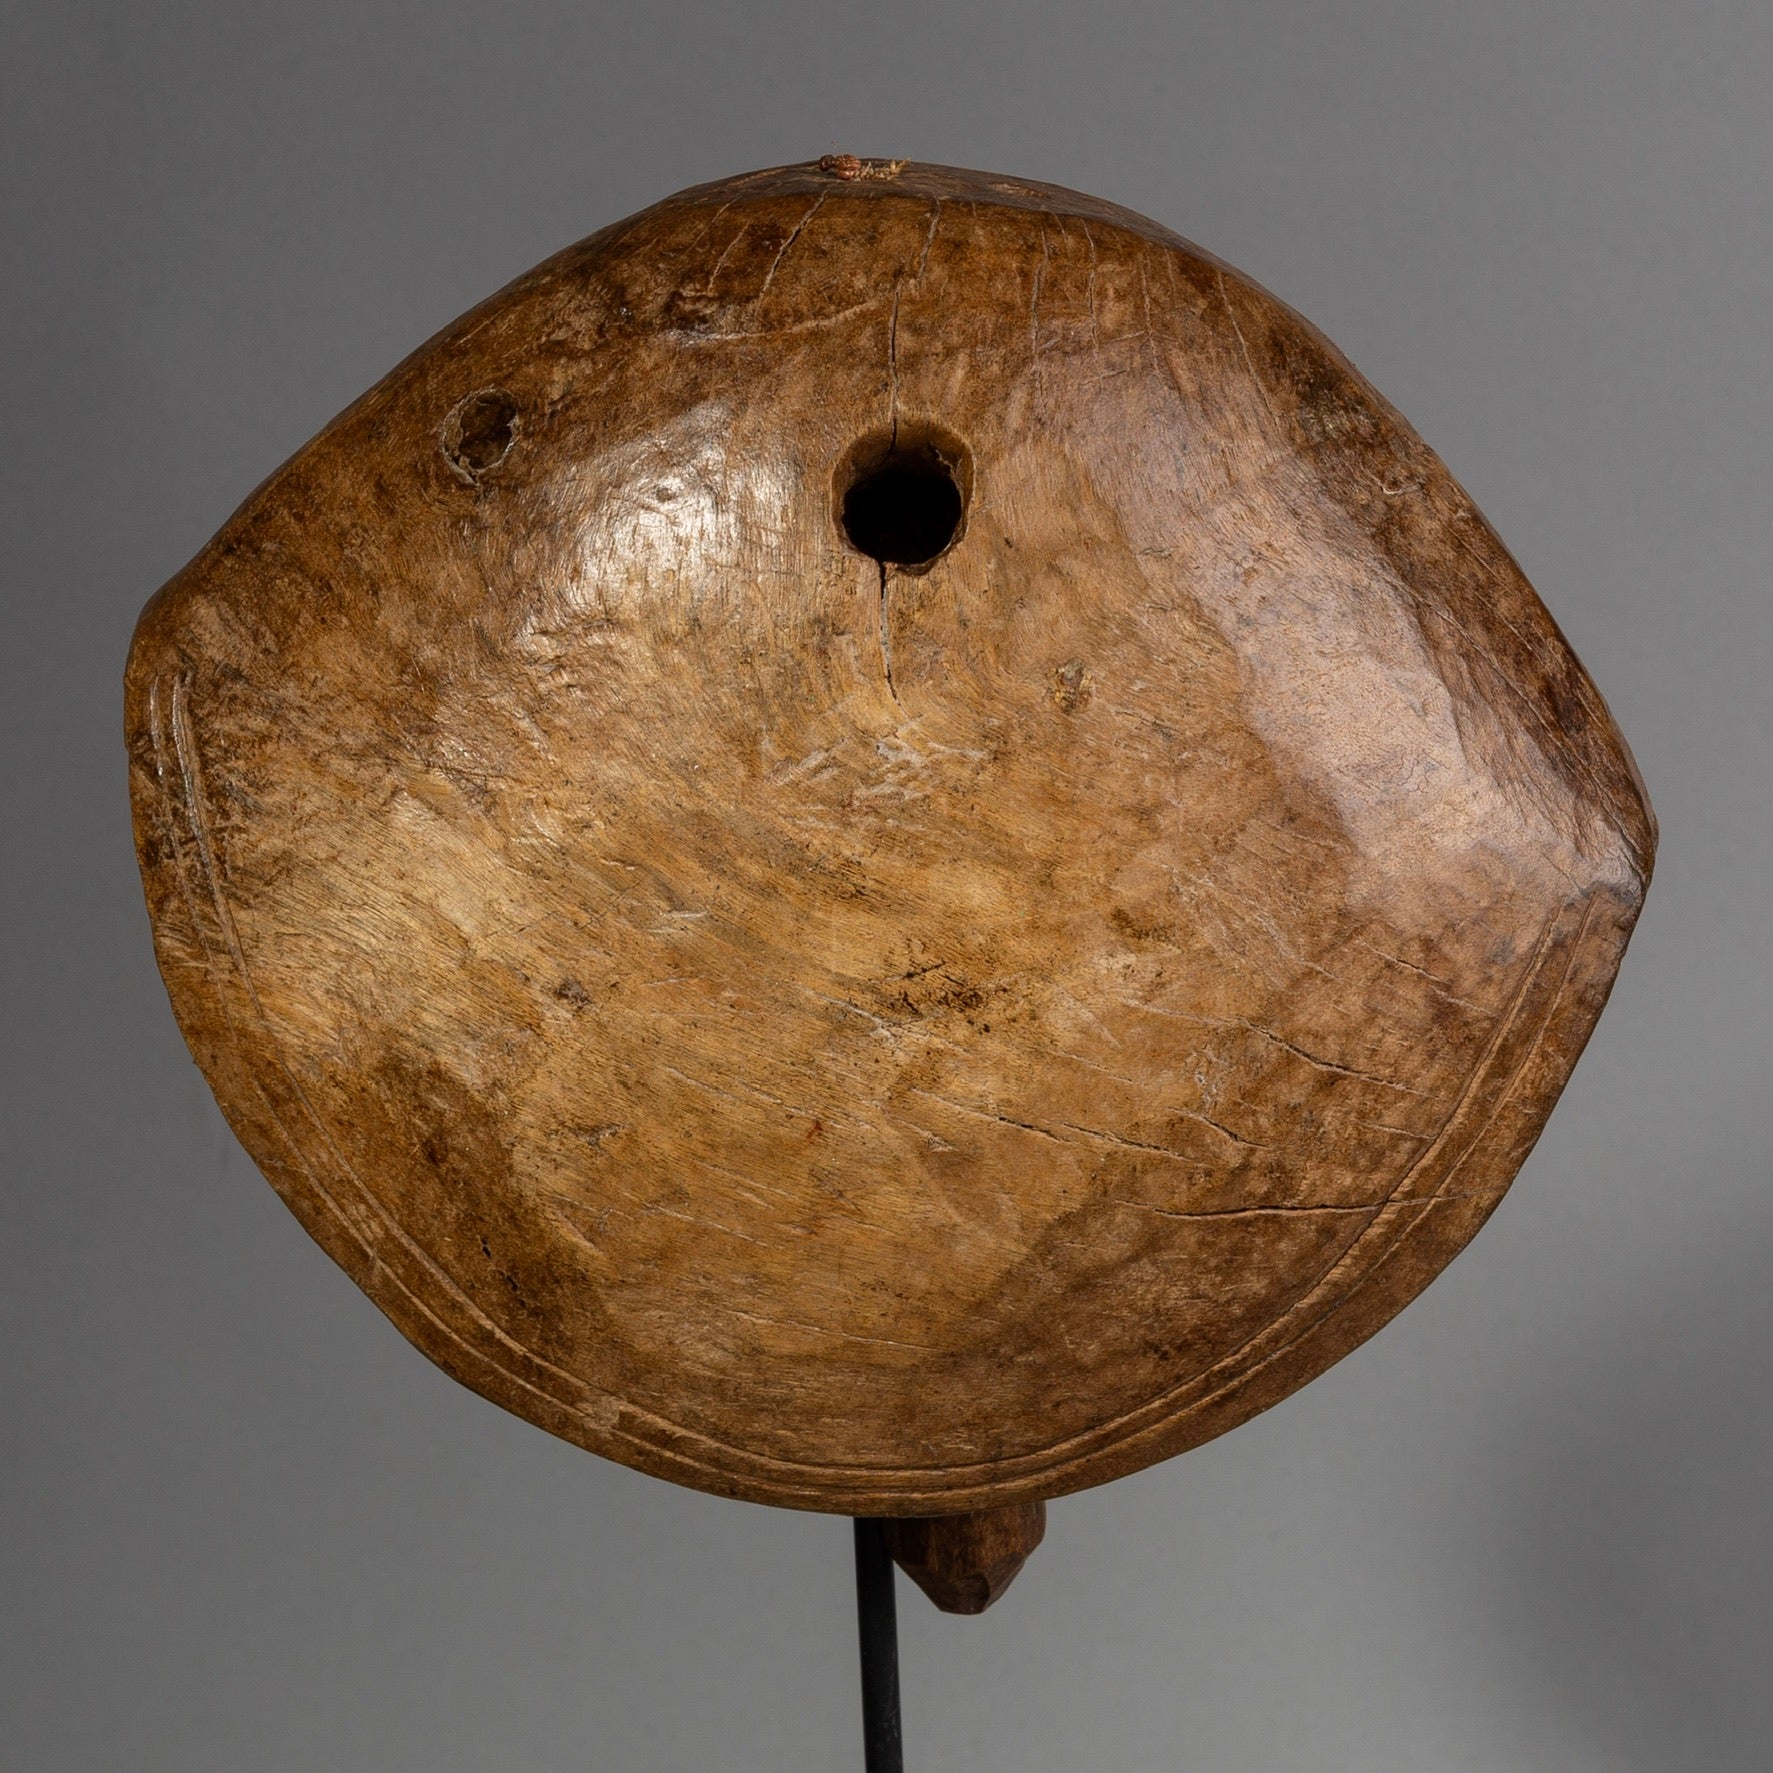 A LARGE CAMEL BELL FROM ETHIOPIA (No 1601 )